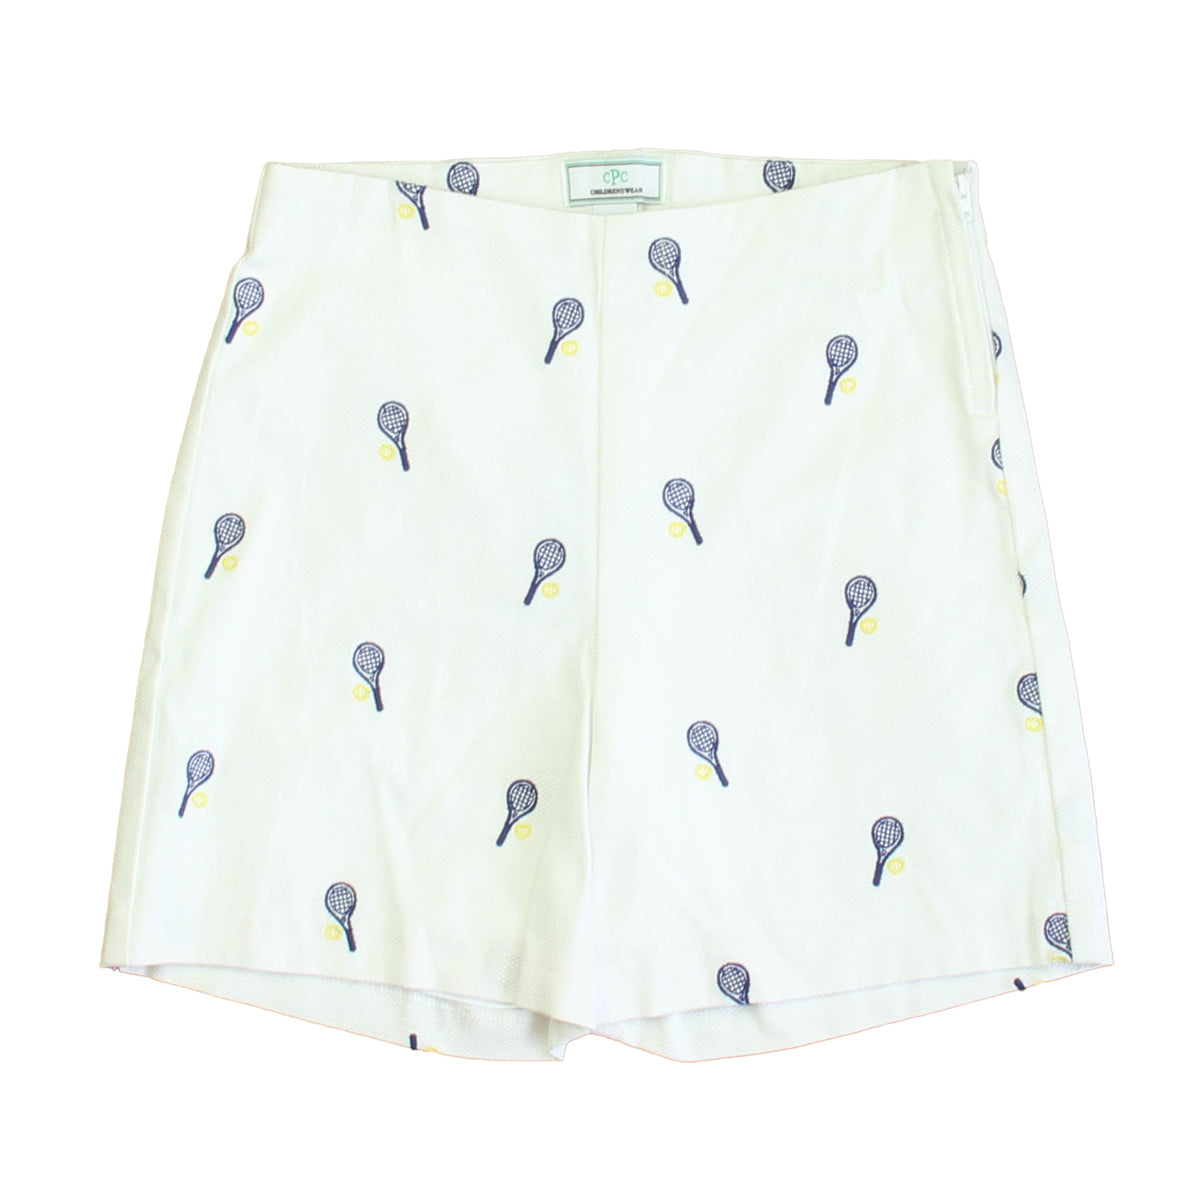 New with Tags: White w/Tennis Rackets Shorts -- FINAL SALE